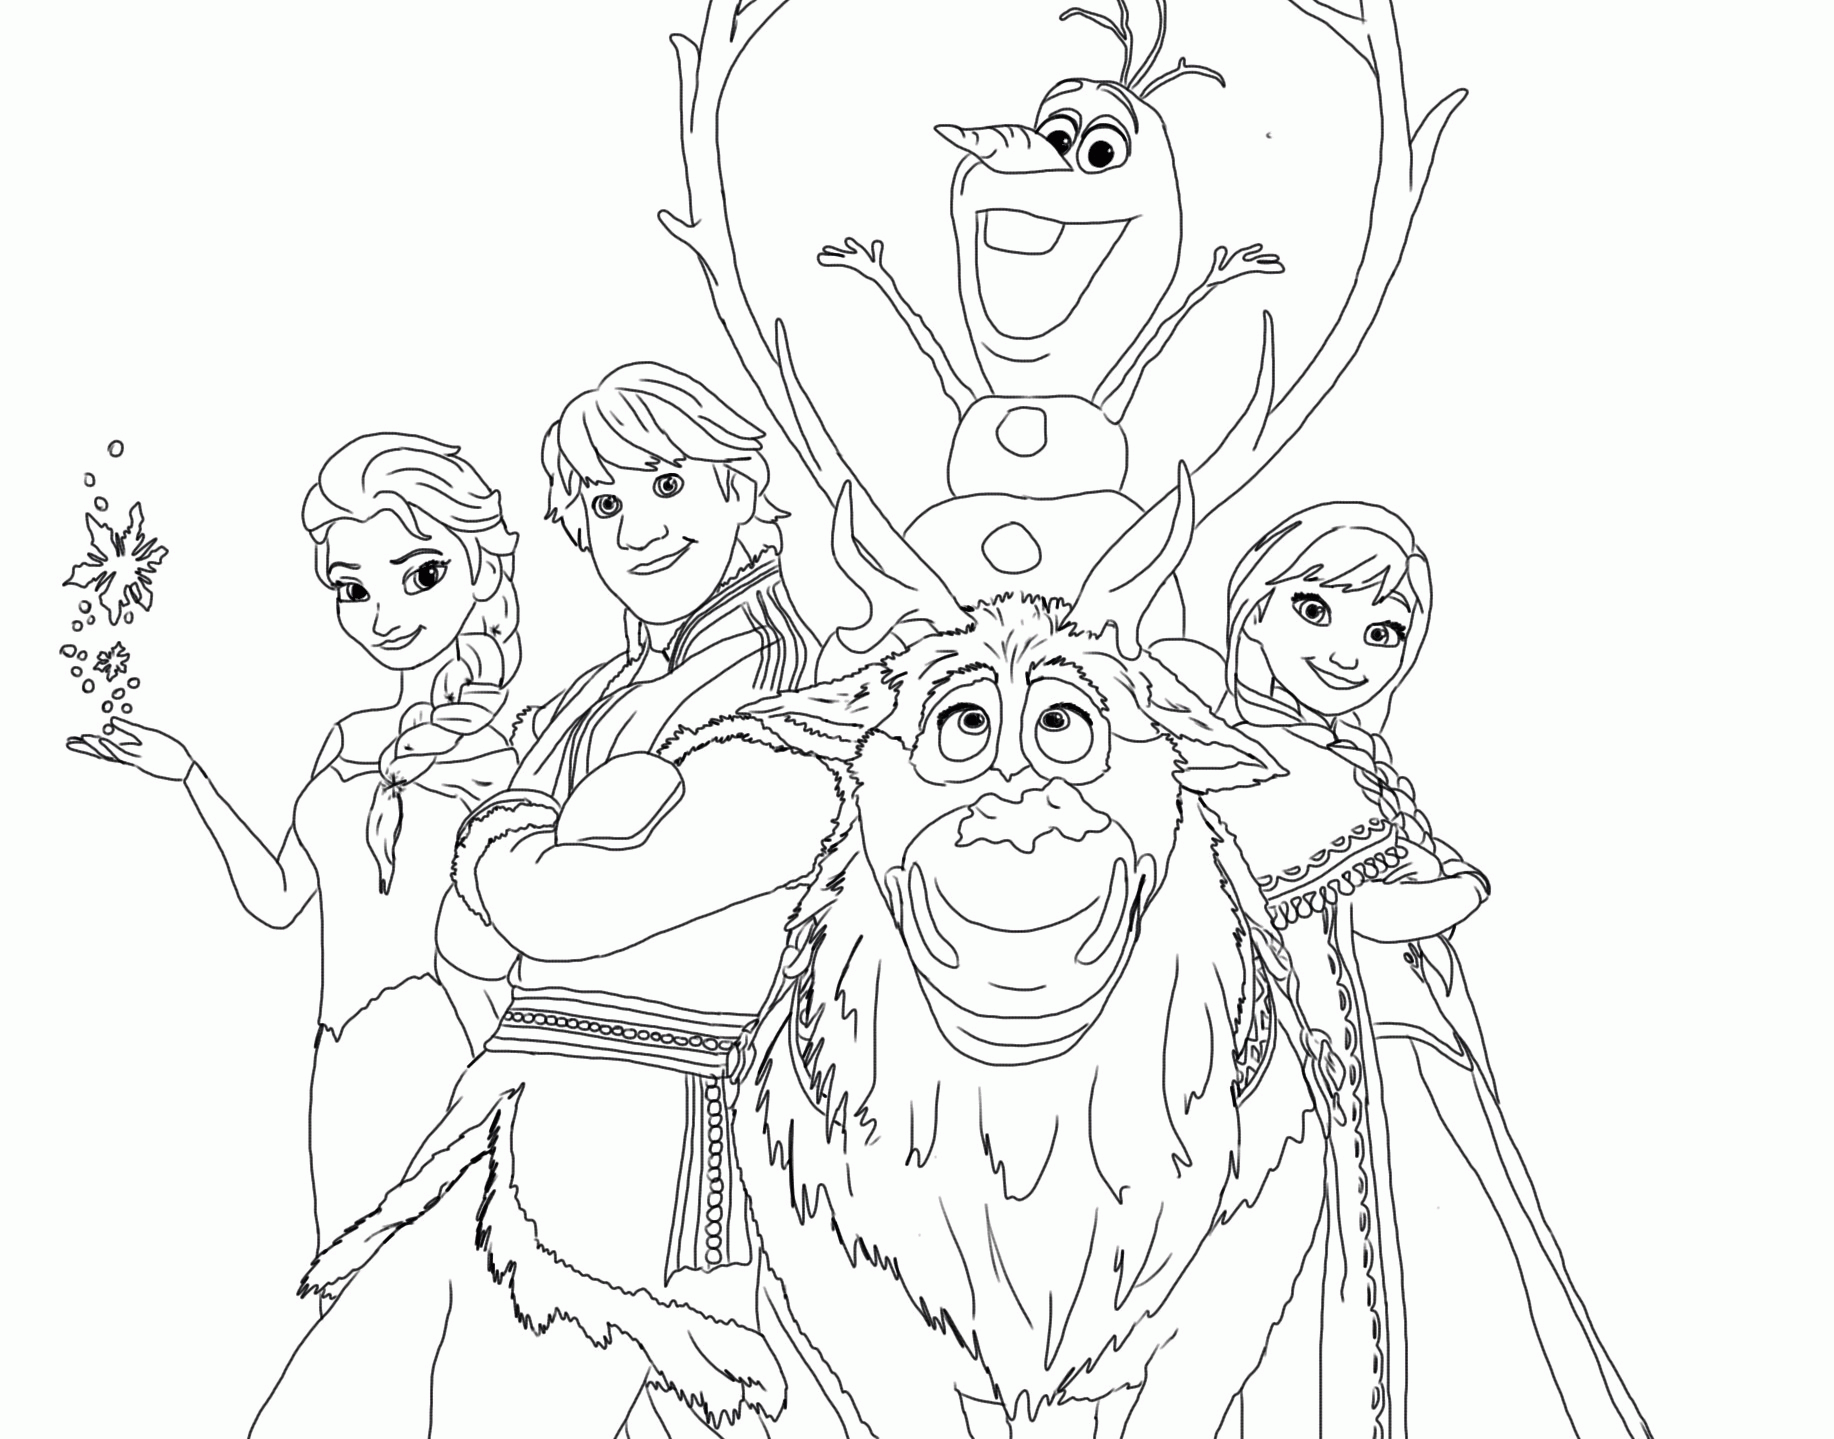 Coloring Pages : Coloringes Frozen Printablesisney Free For ...